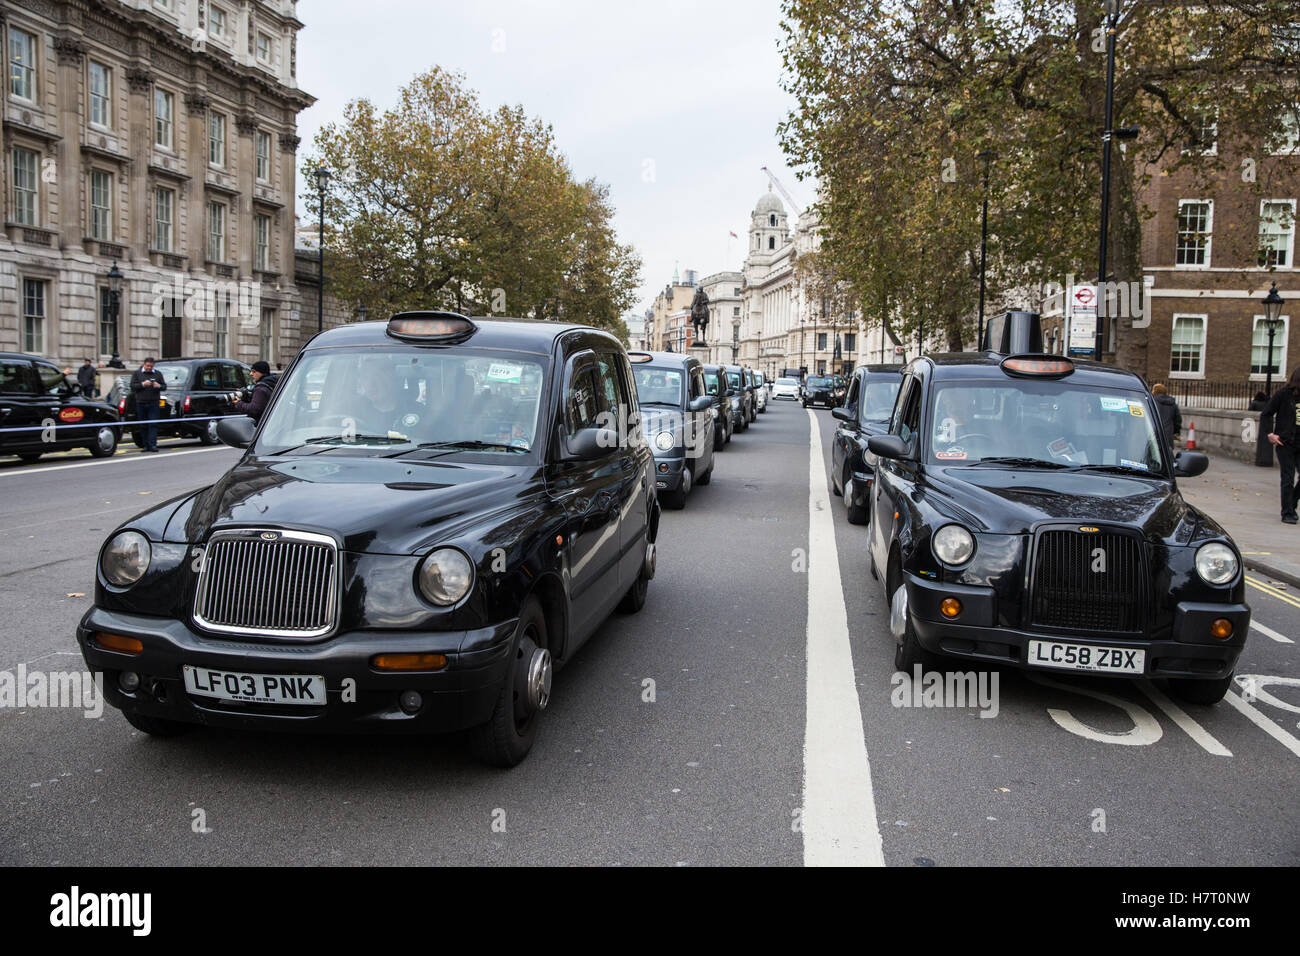 London, UK. 8th November, 2016. Black cab drivers representing the United Cabbies Group (UCG), London Cab Drivers Club and RMT block Whitehall as part of a protest intended to apply pressure on the Government to launch a public inquiry into Transport for London’s (TfL) management of traffic and transport infrastructure and its failure to prevent congestion and increased pollution in London. Stock Photo